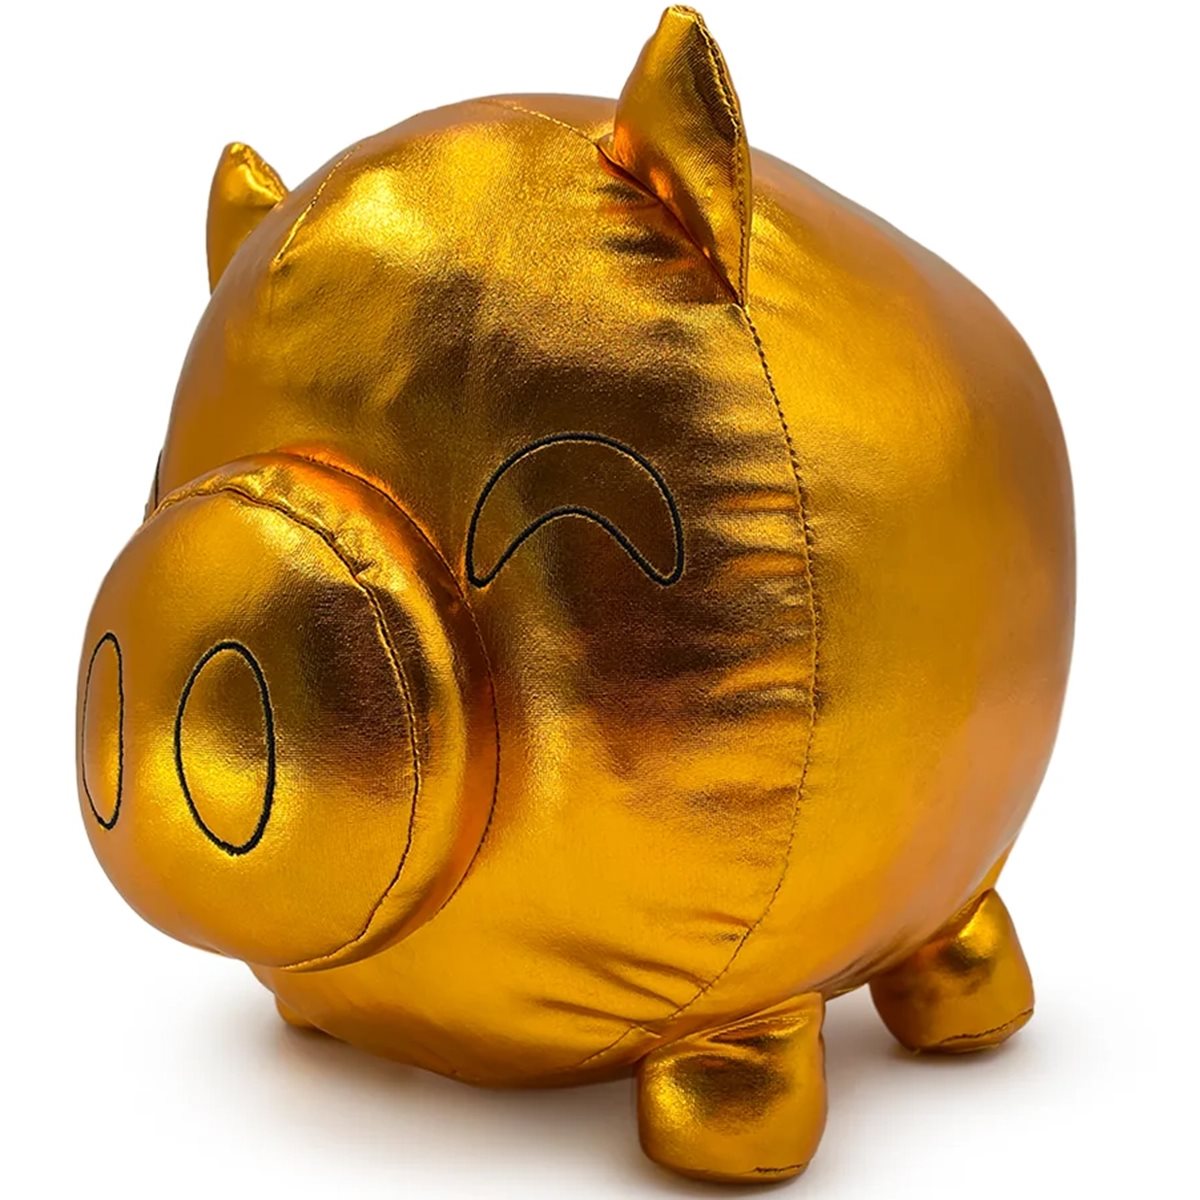 Piggy Bank Plush (9in) – Youtooz Collectibles